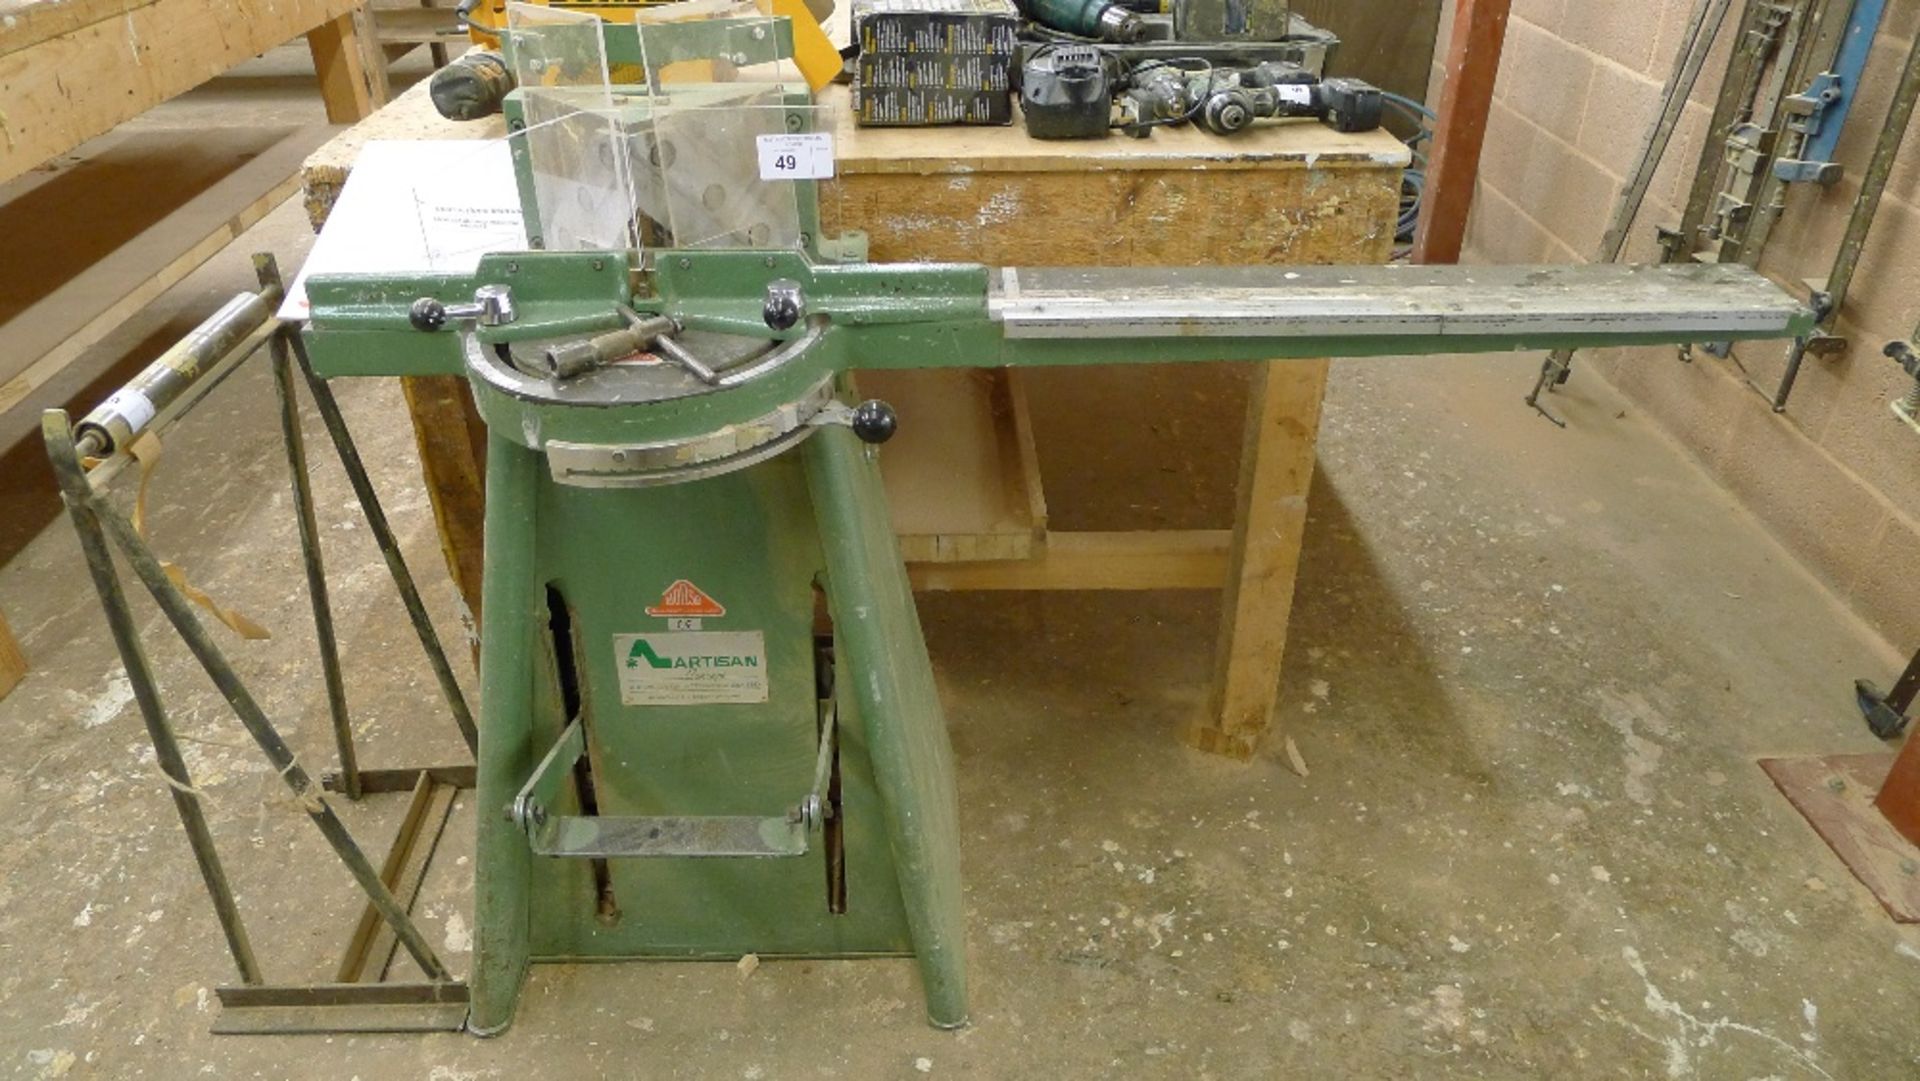 1 Morso foot operated mitre cutter model F (please note the right hand measuring arm is broken and